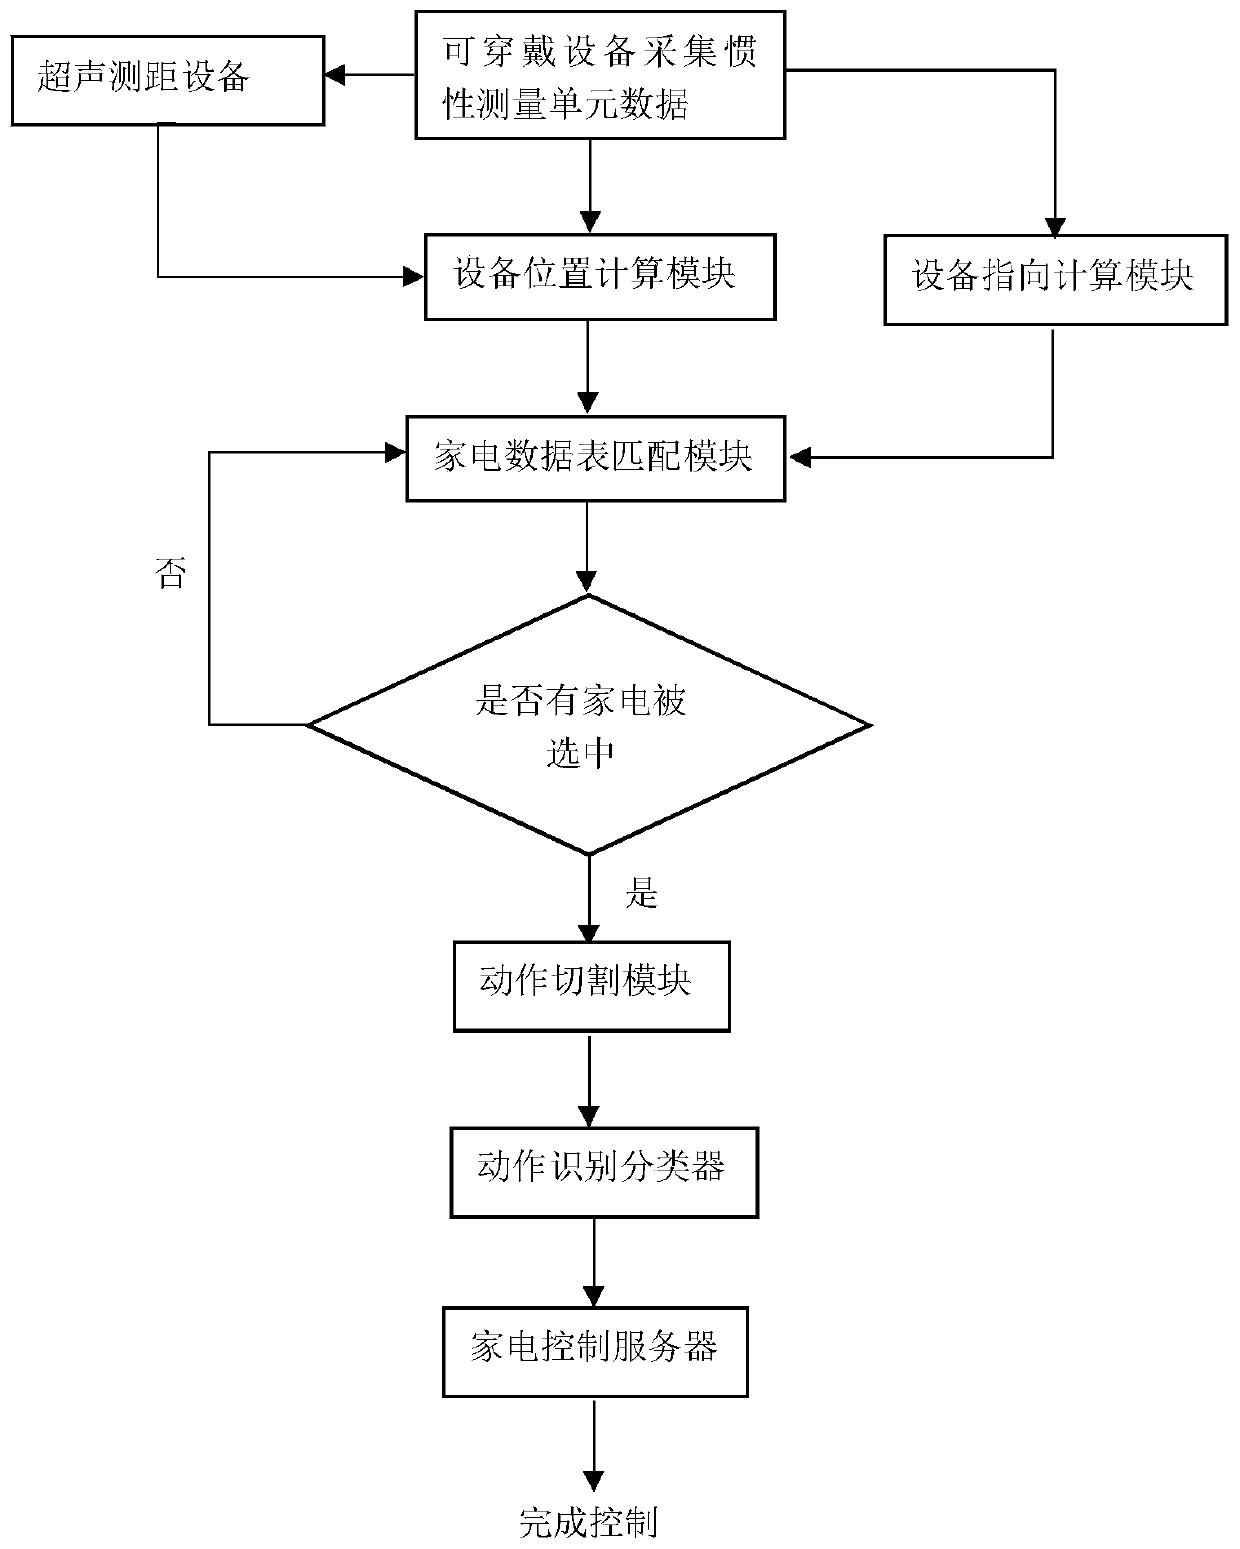 Multi-home appliance control method based on wearable device